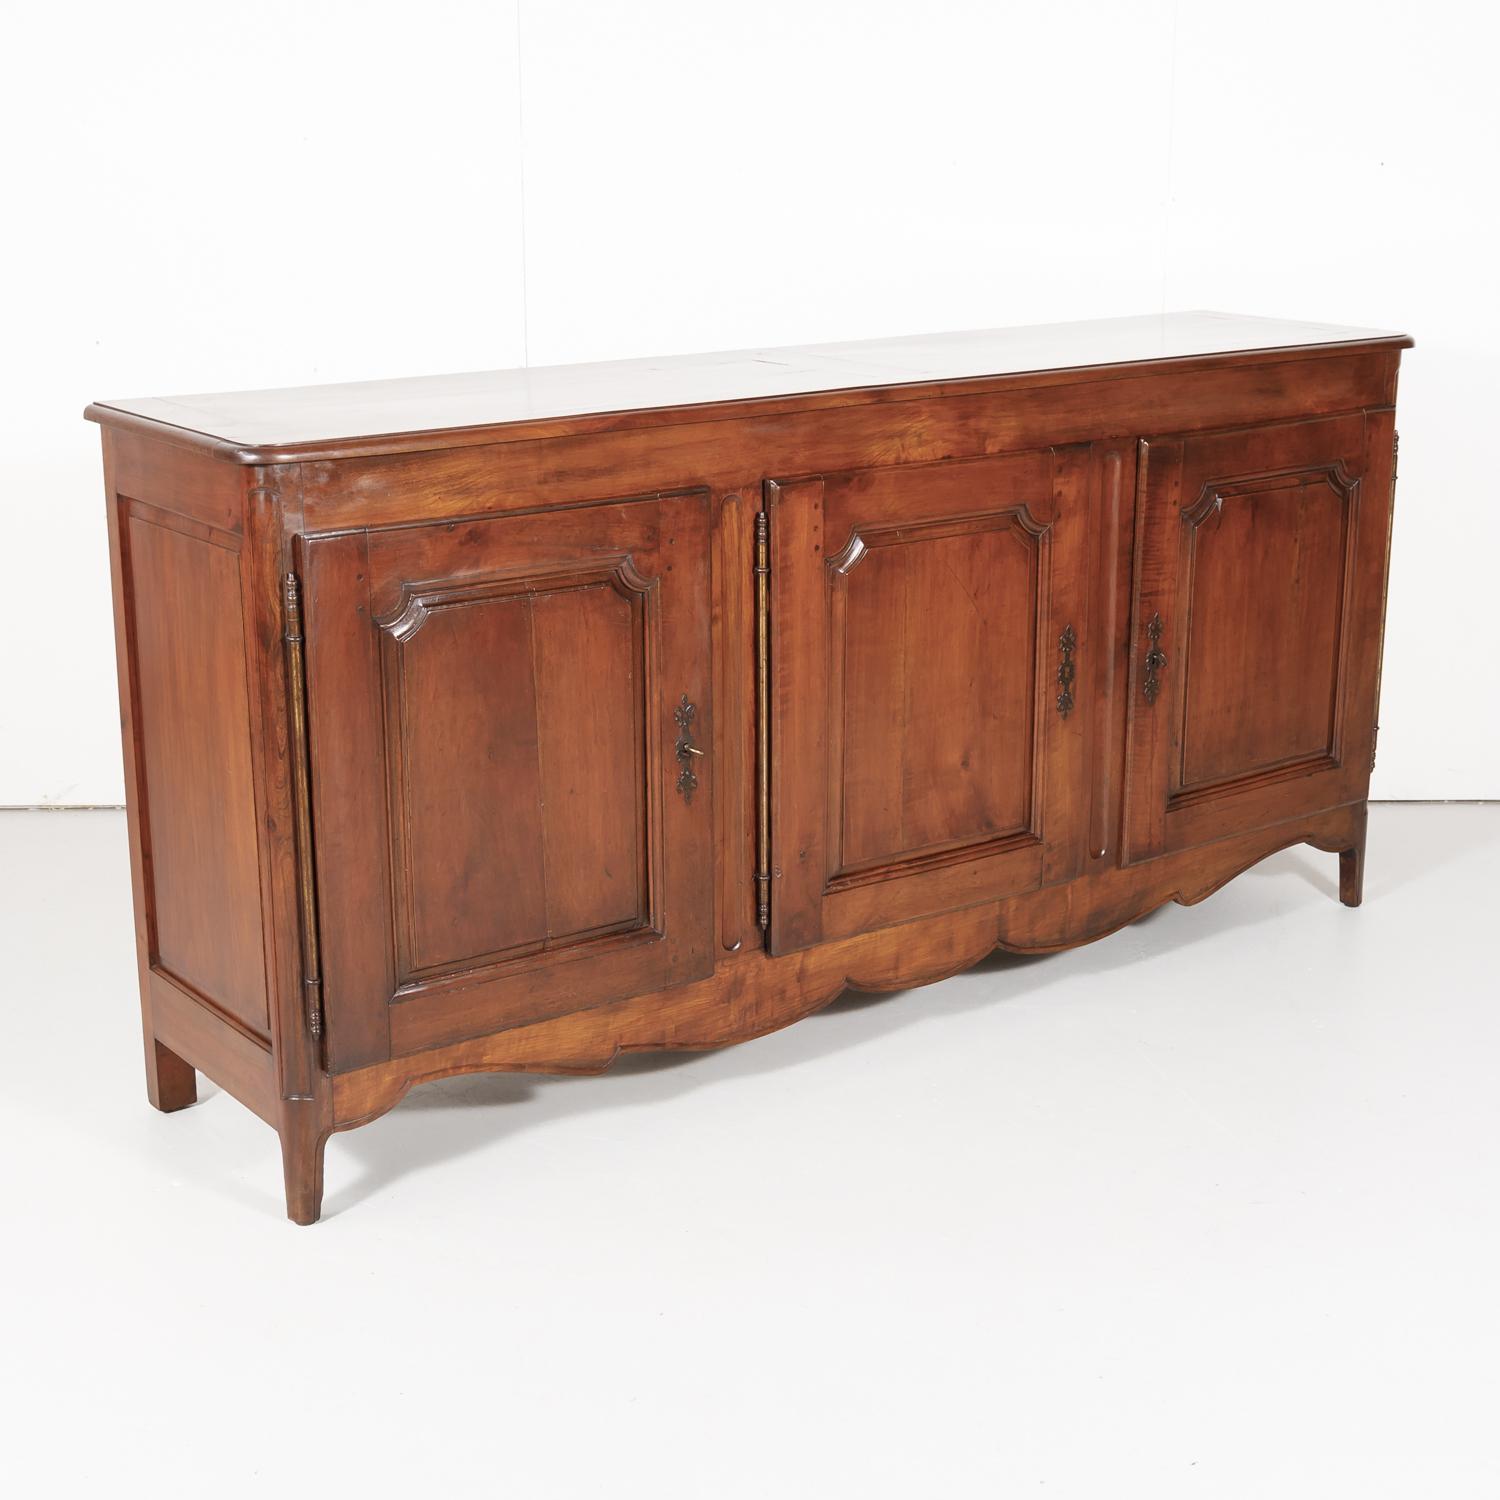 French 18th Century Solid Cherry Louis XV-Louis XVI Transition Period Enfilade Buffet